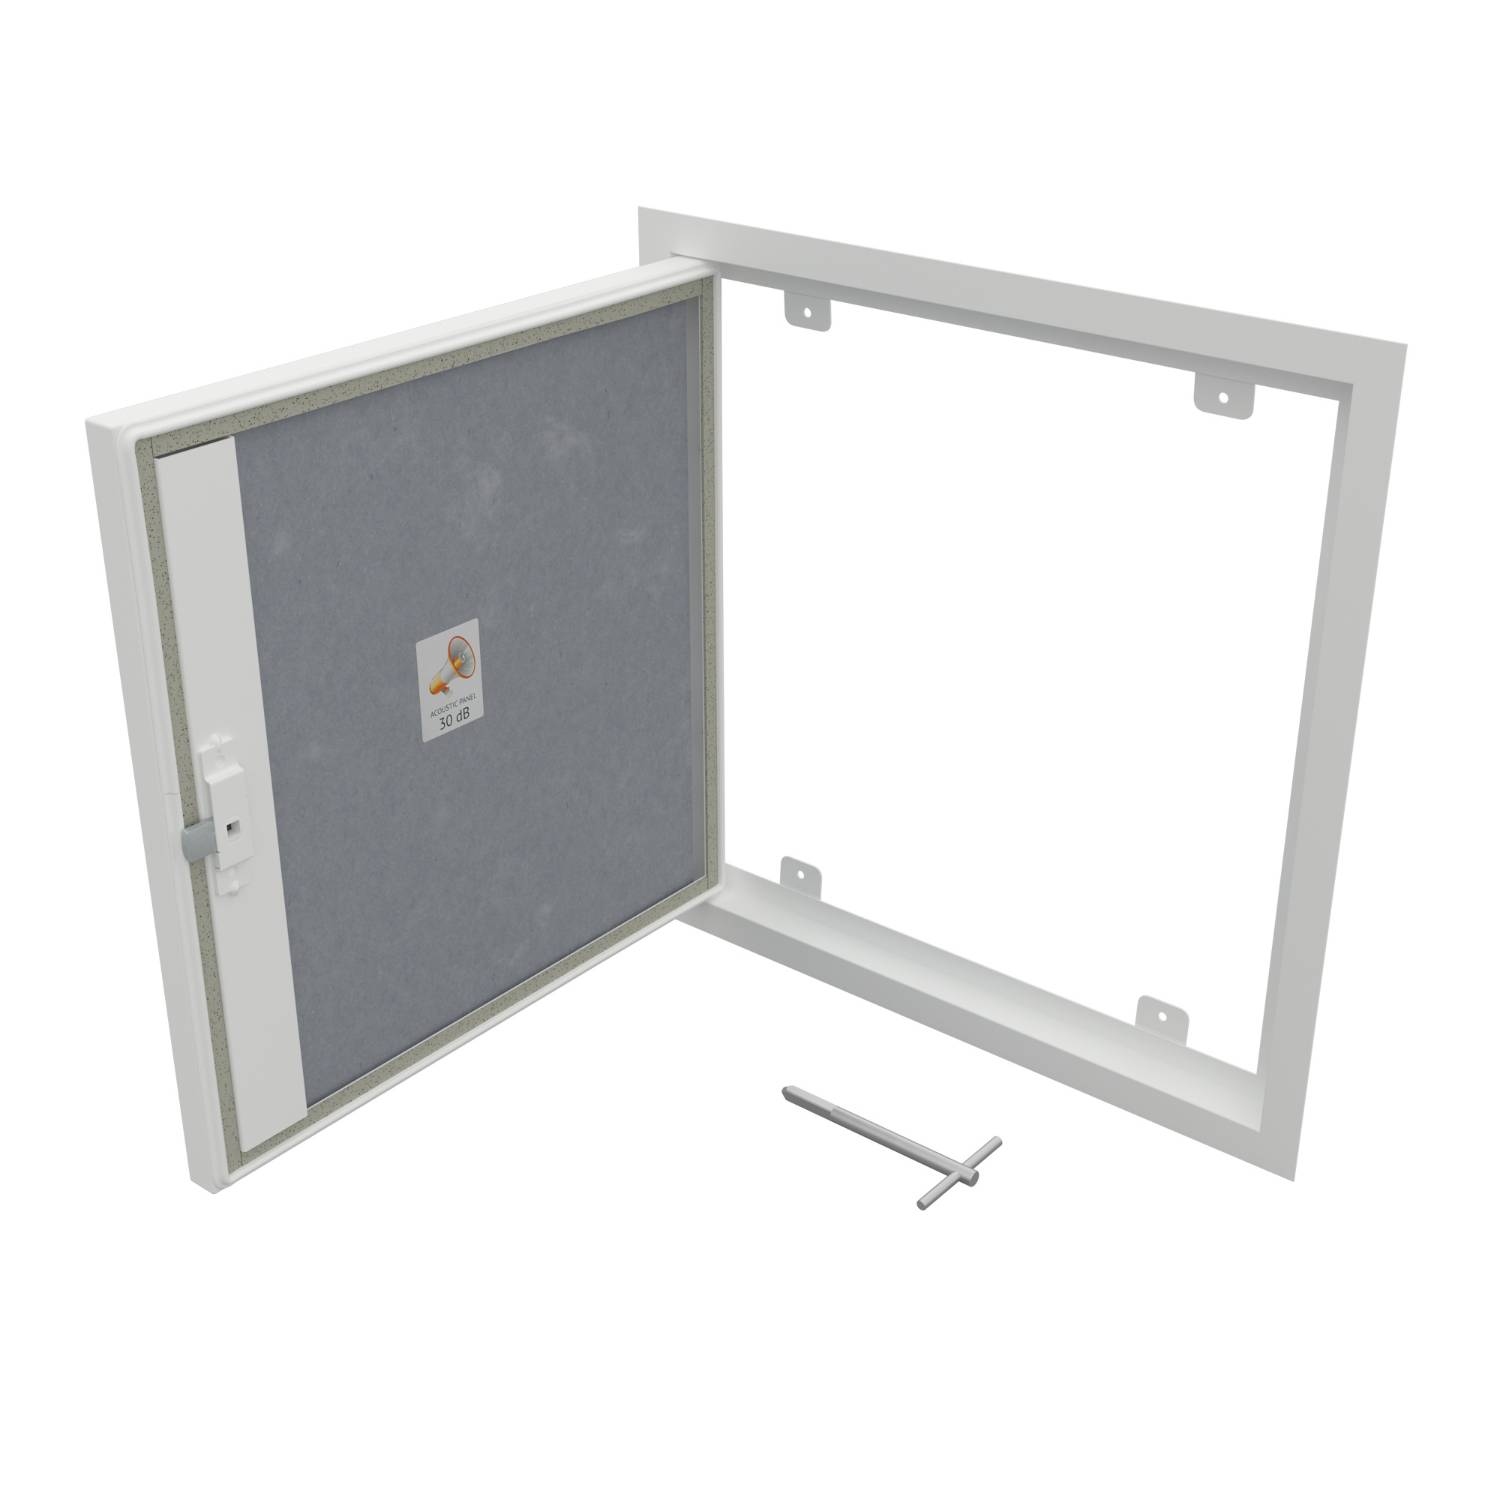 Slimfit Wall Metal Access Panel (EX01 Range) - Picture Frame - 2 Hour Fire Rated  - Smoke Tested - 30dB Acoustic Rated - Airtight - Access Panel